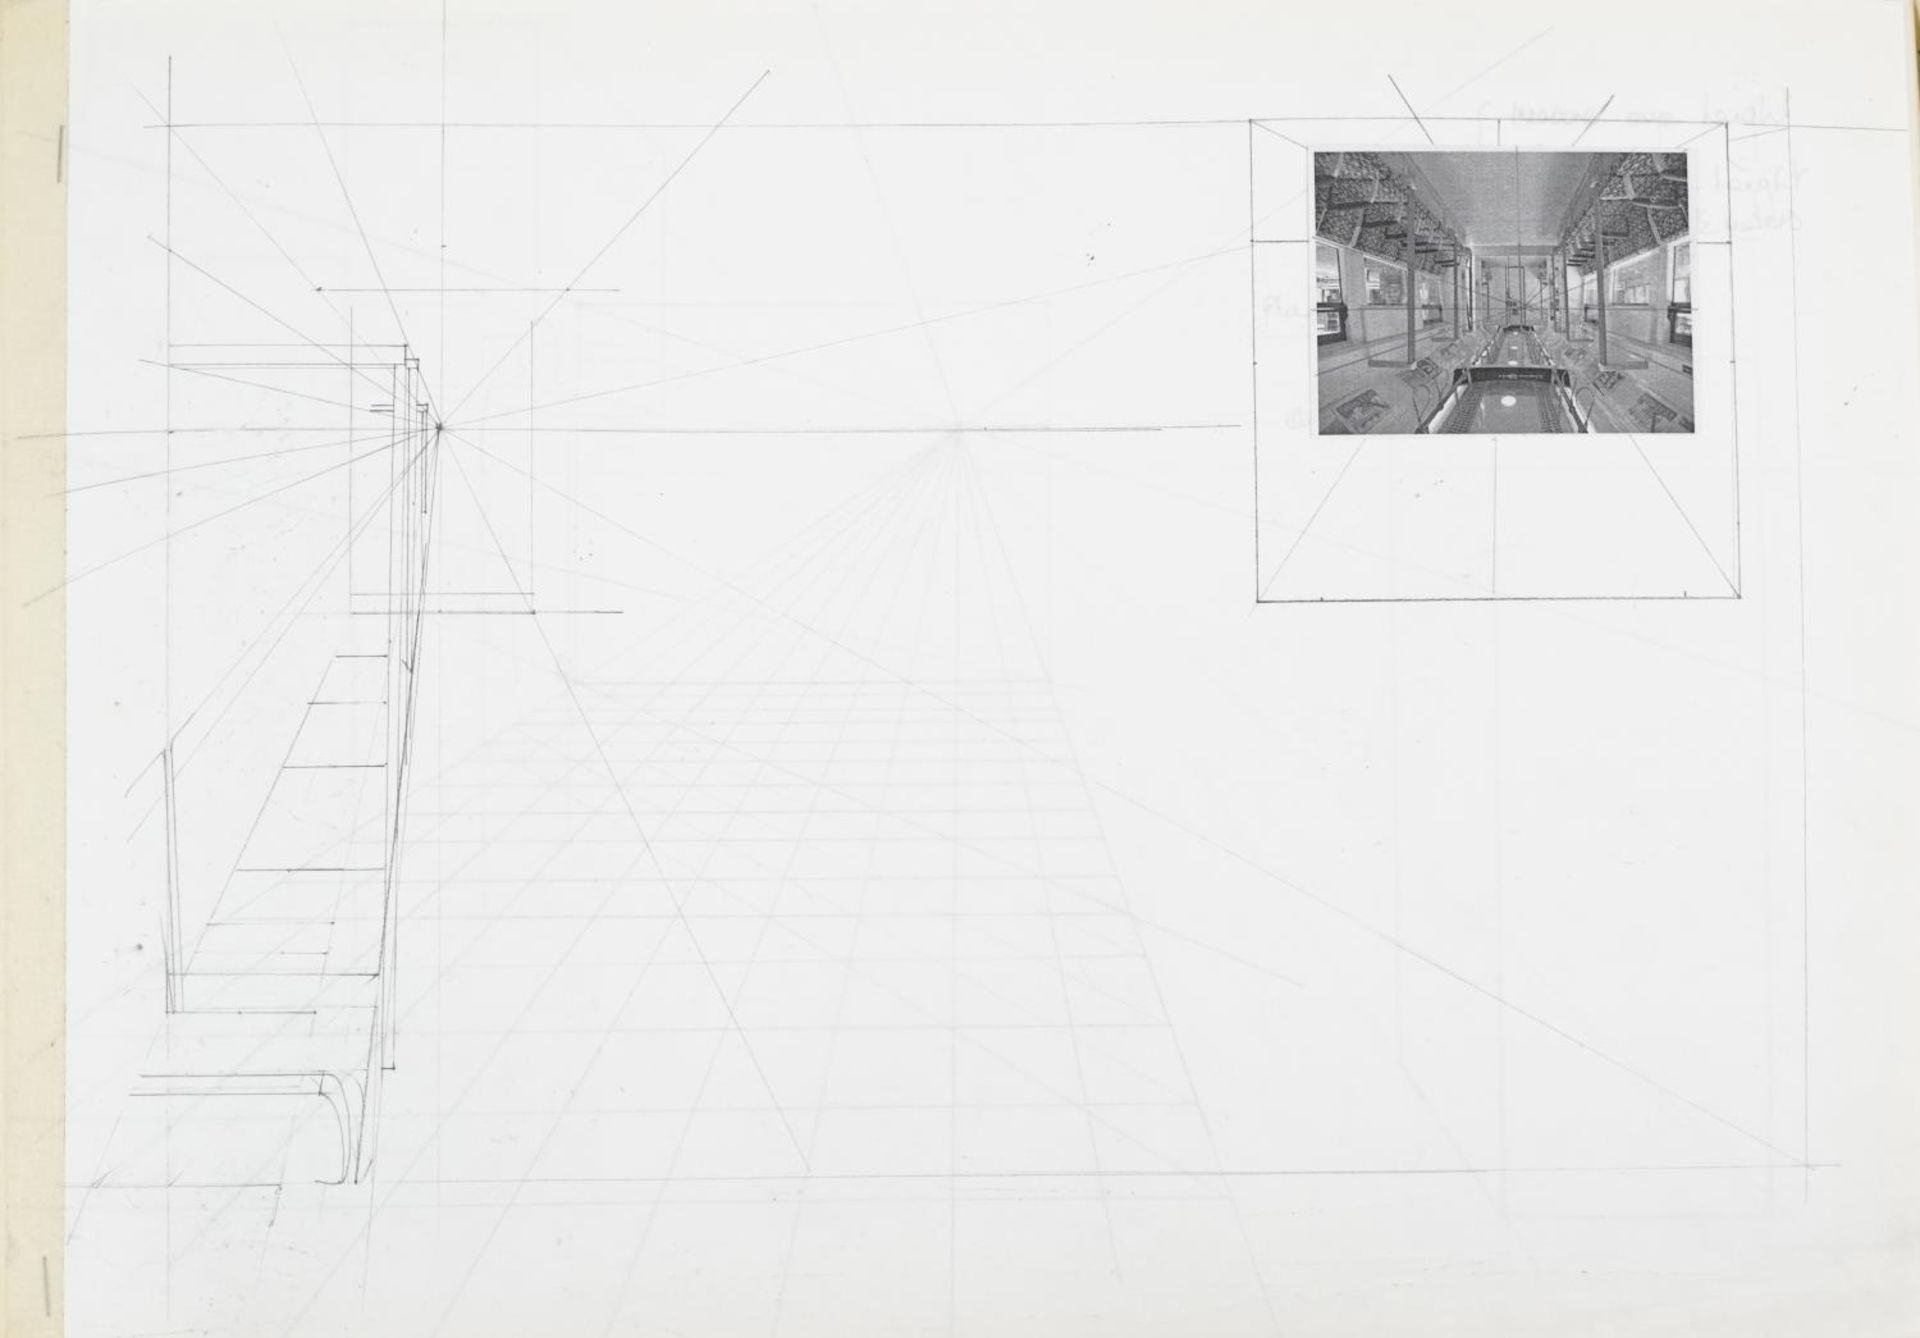 Neil Wilkinson - Folio of drawings and works from Brighton Art College, overall 42cm x 30cm - Image 10 of 18